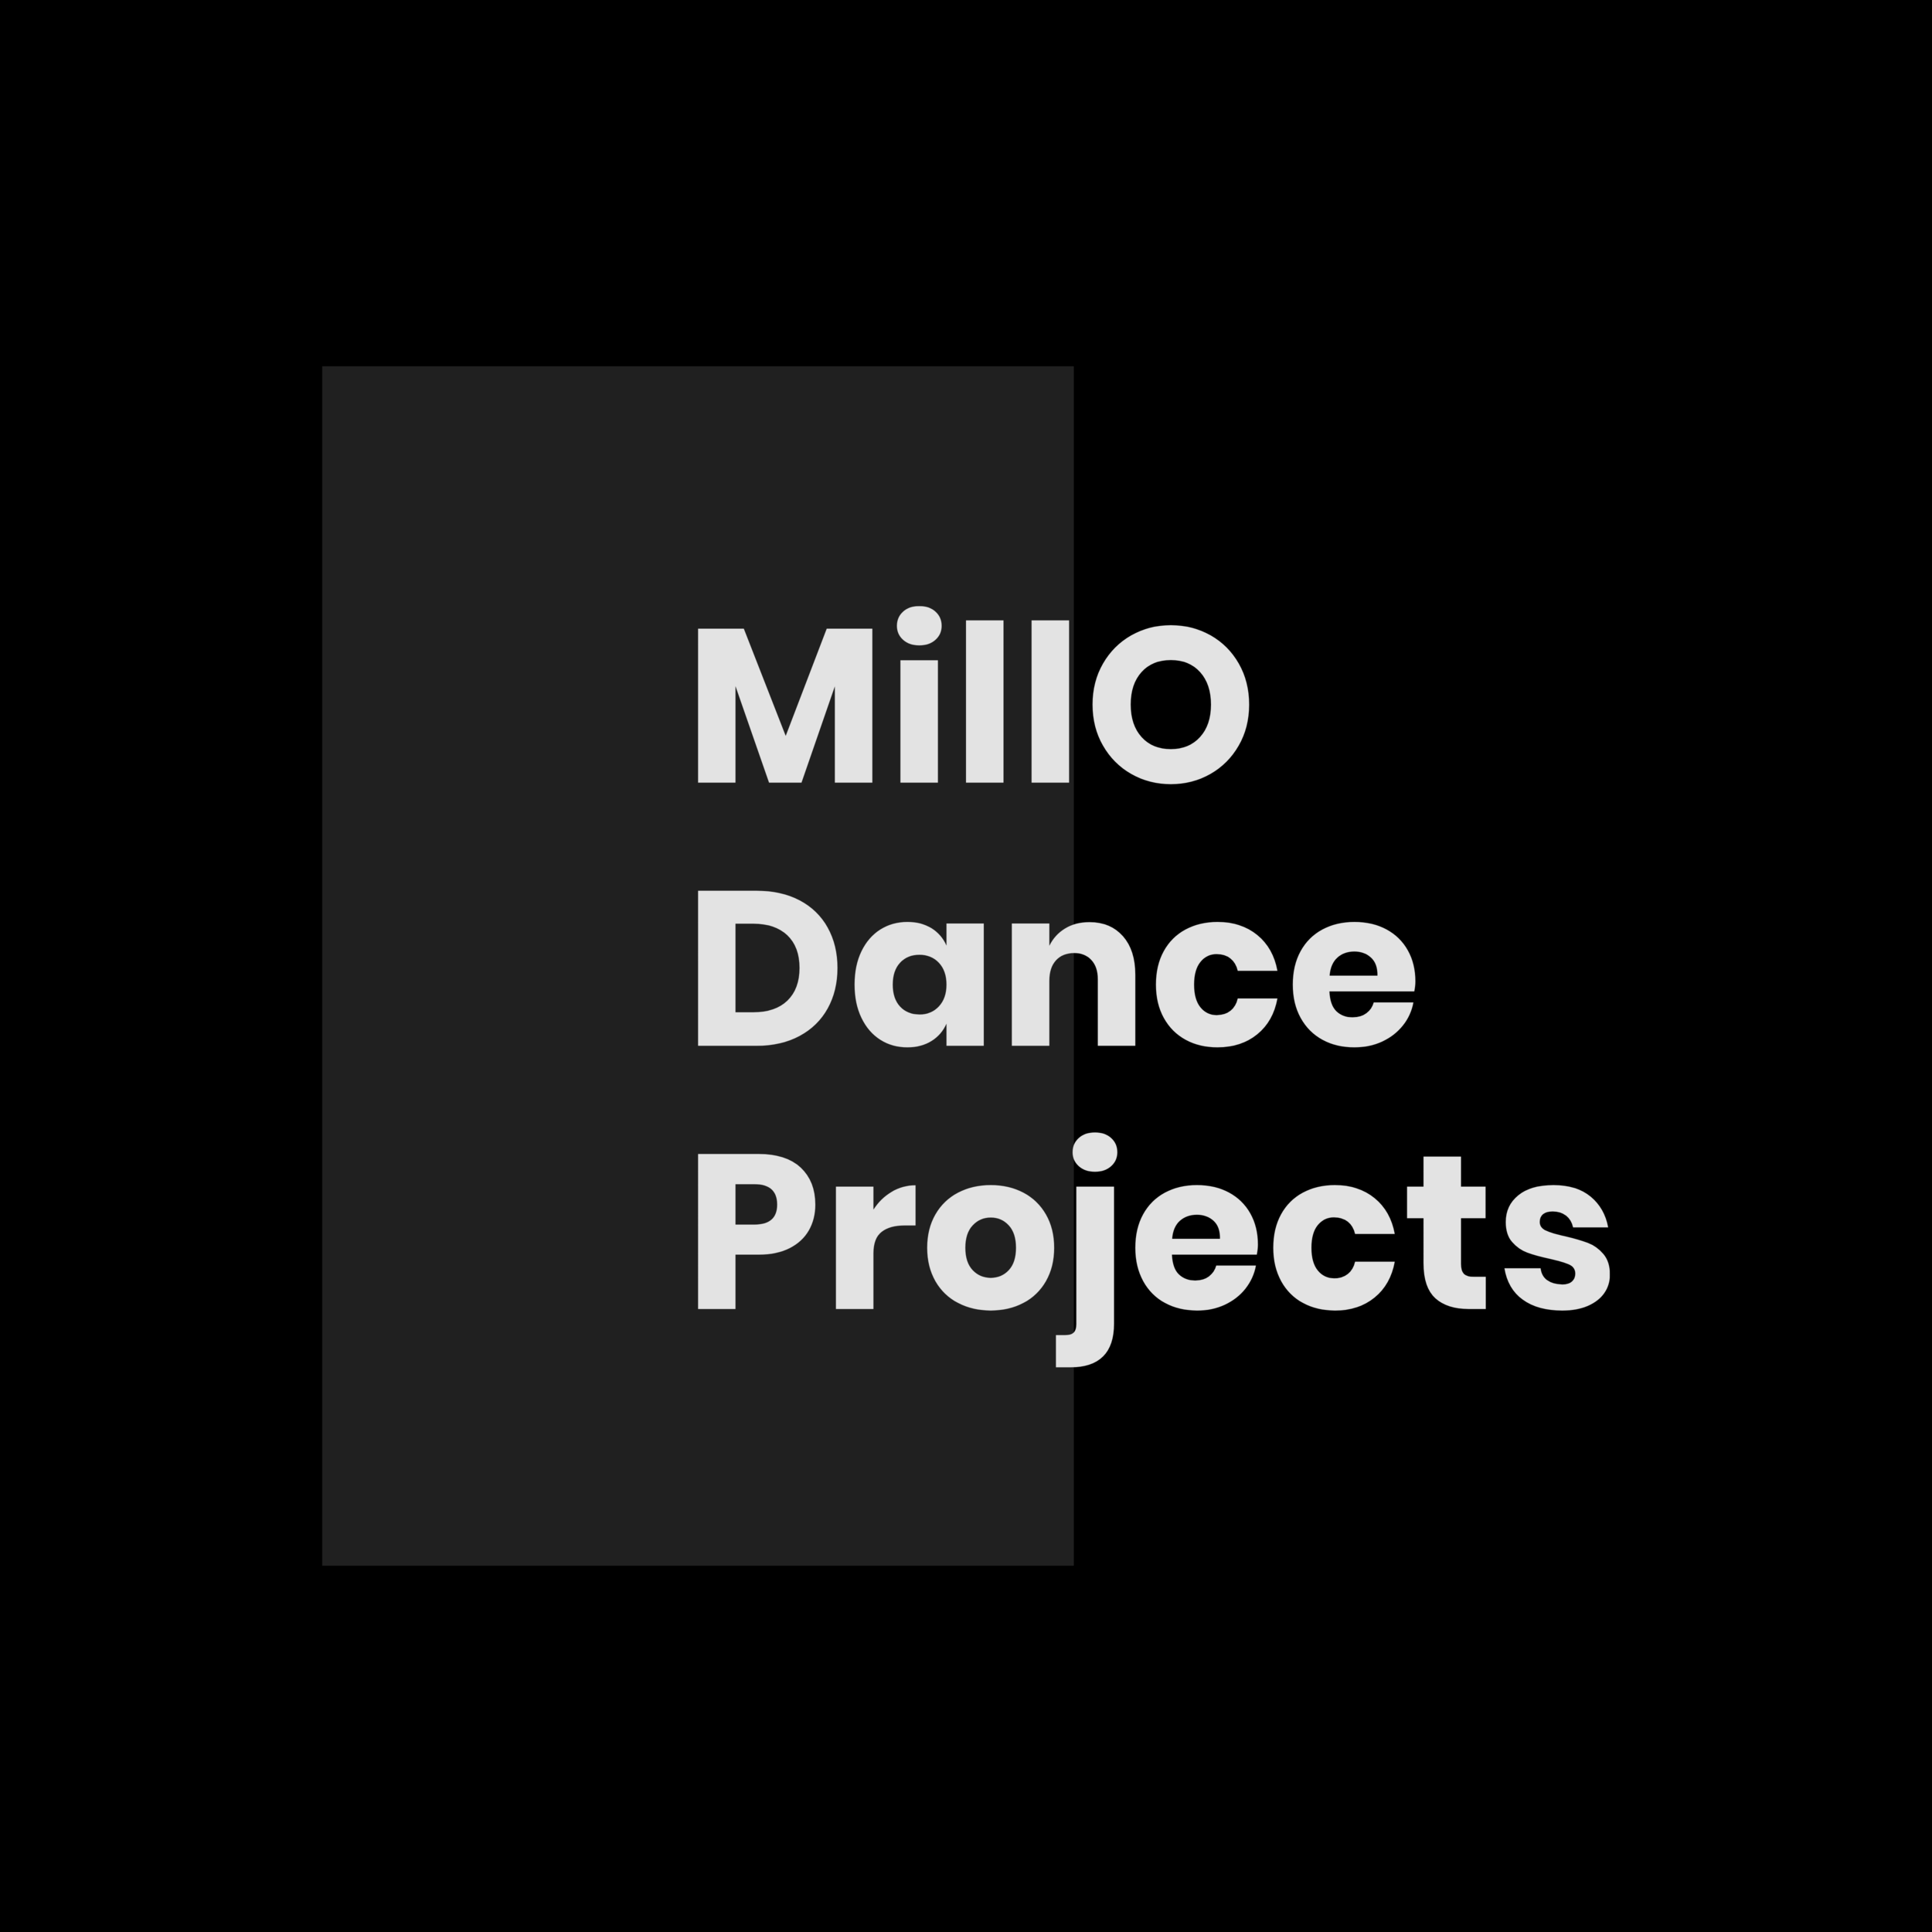 Millo Dance Projects logo